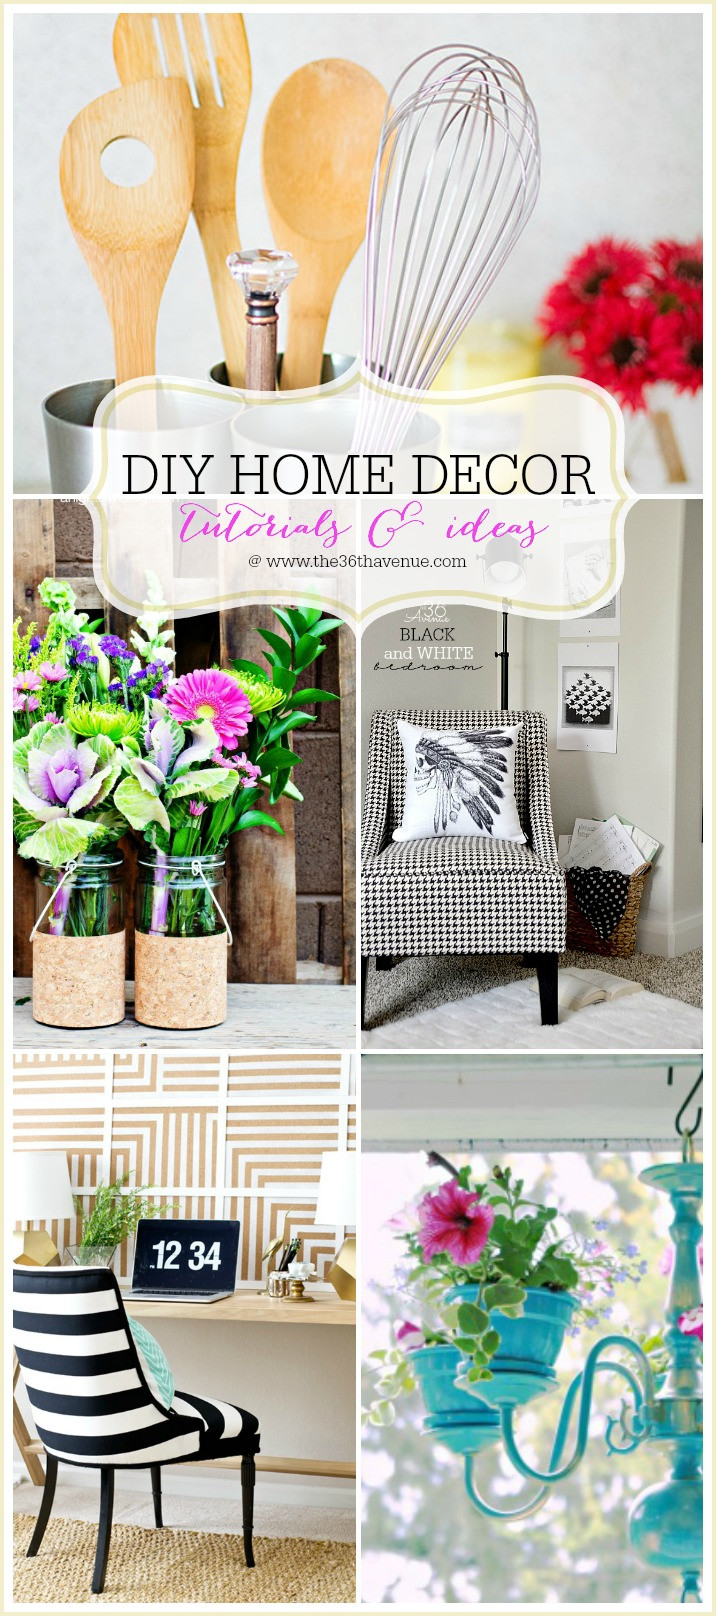 Easy DIY Home Decorations
 The 36th AVENUE Home Decor DIY Projects